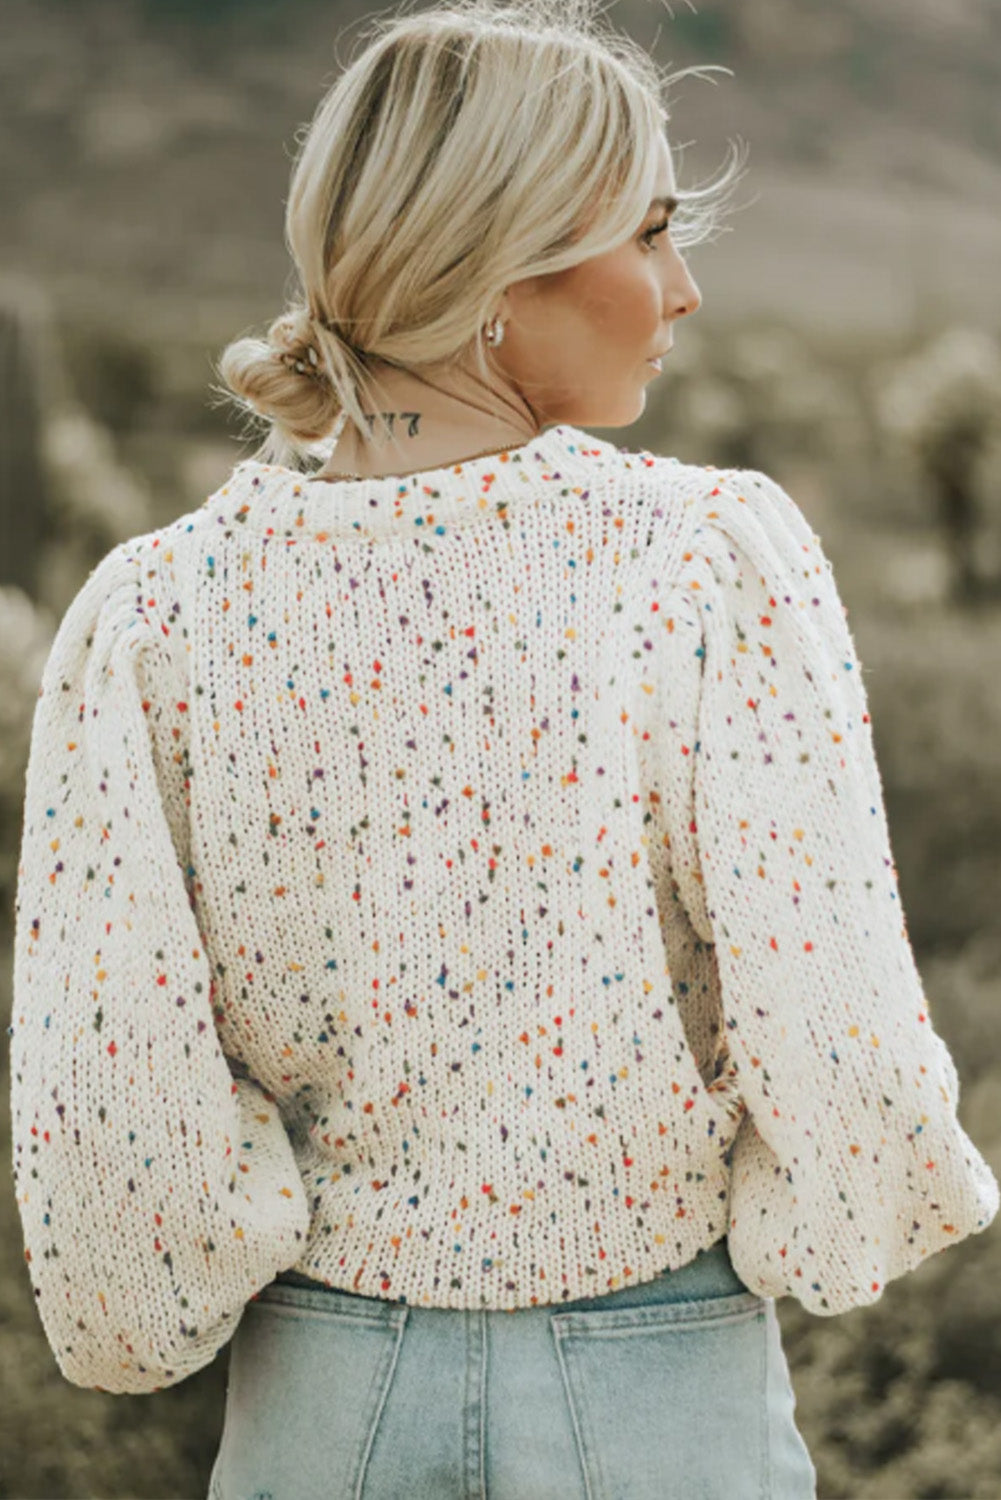 Light French Beige Colorful Dots Cable Knit Crew Neck Sweater